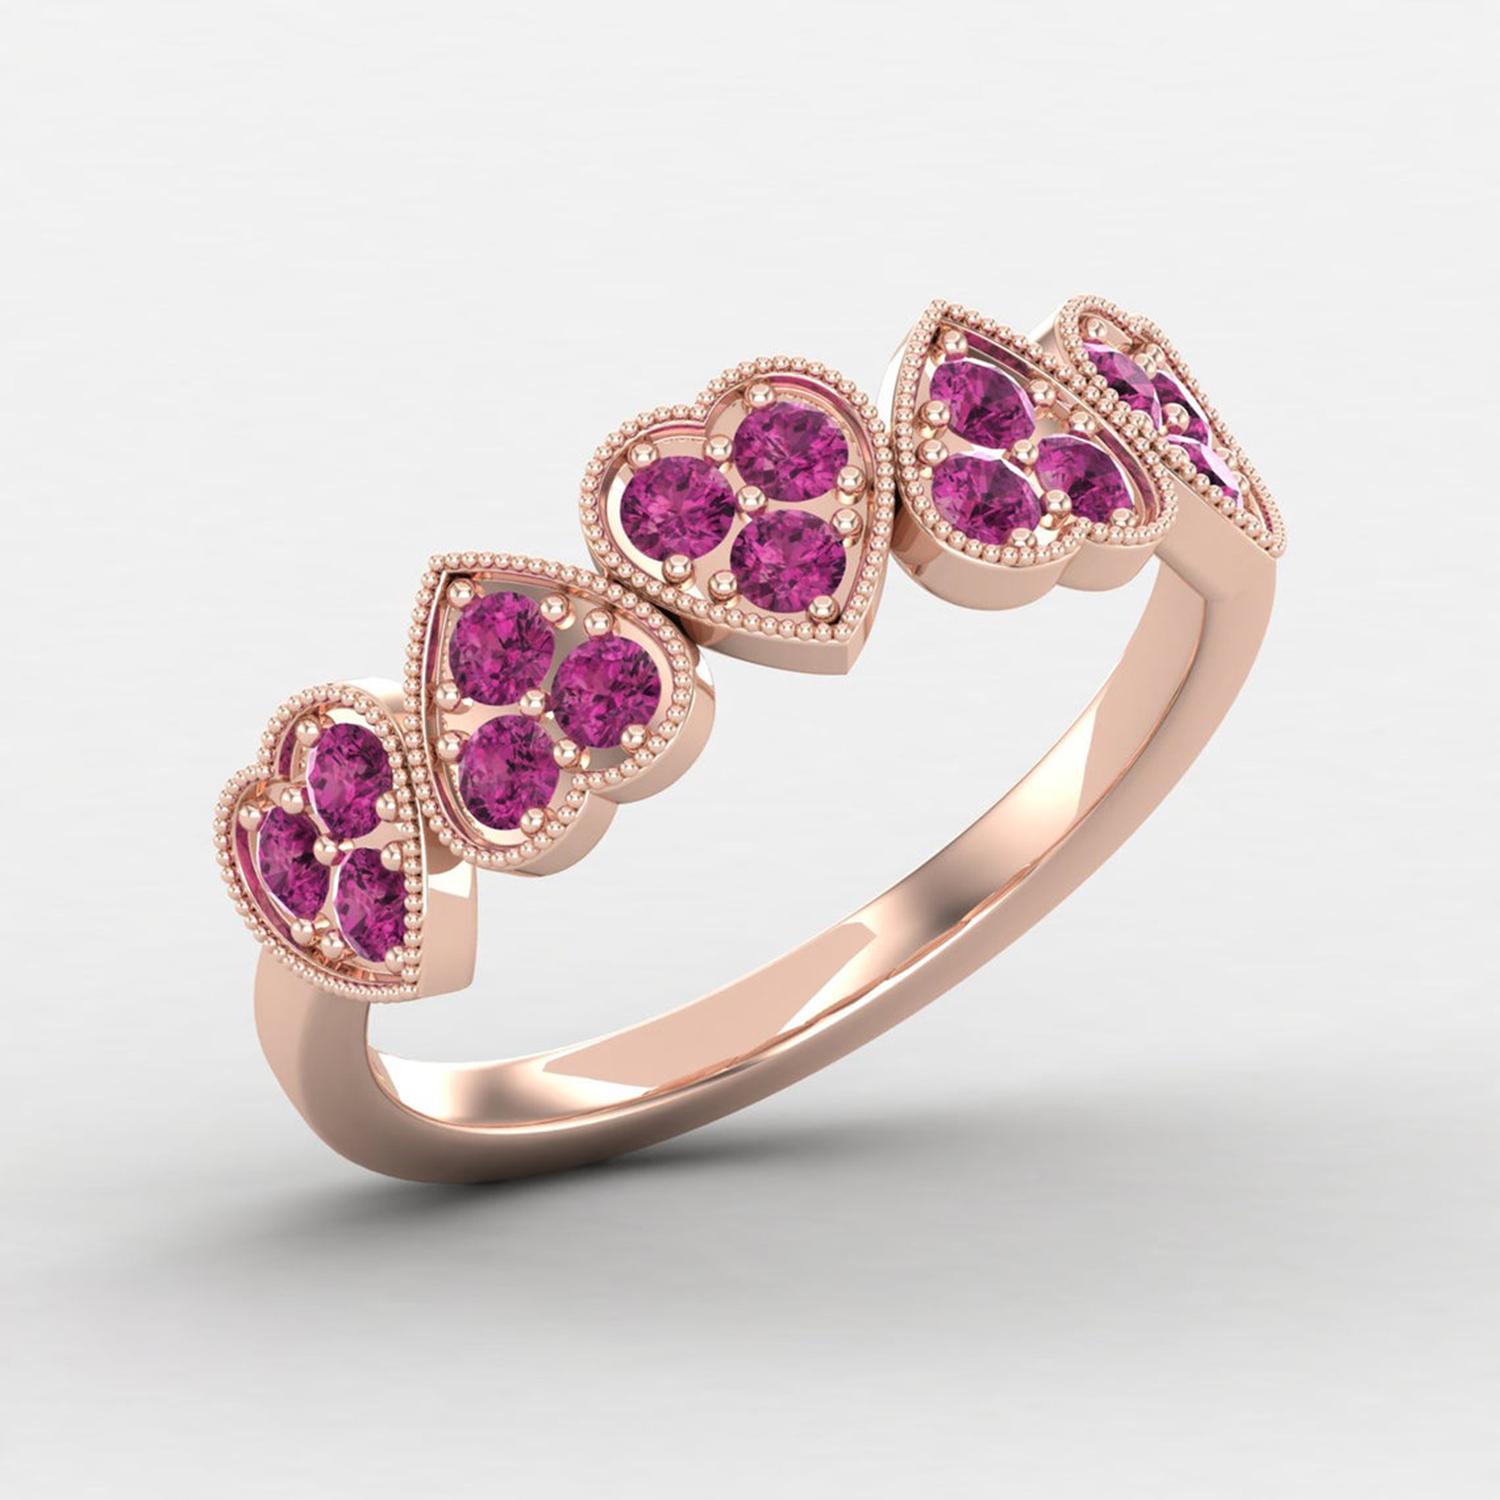 Round Cut 14 Karat Gold Rubellite Tourmaline Ring / Gold Wedding Ring / Heart Ring for Her For Sale